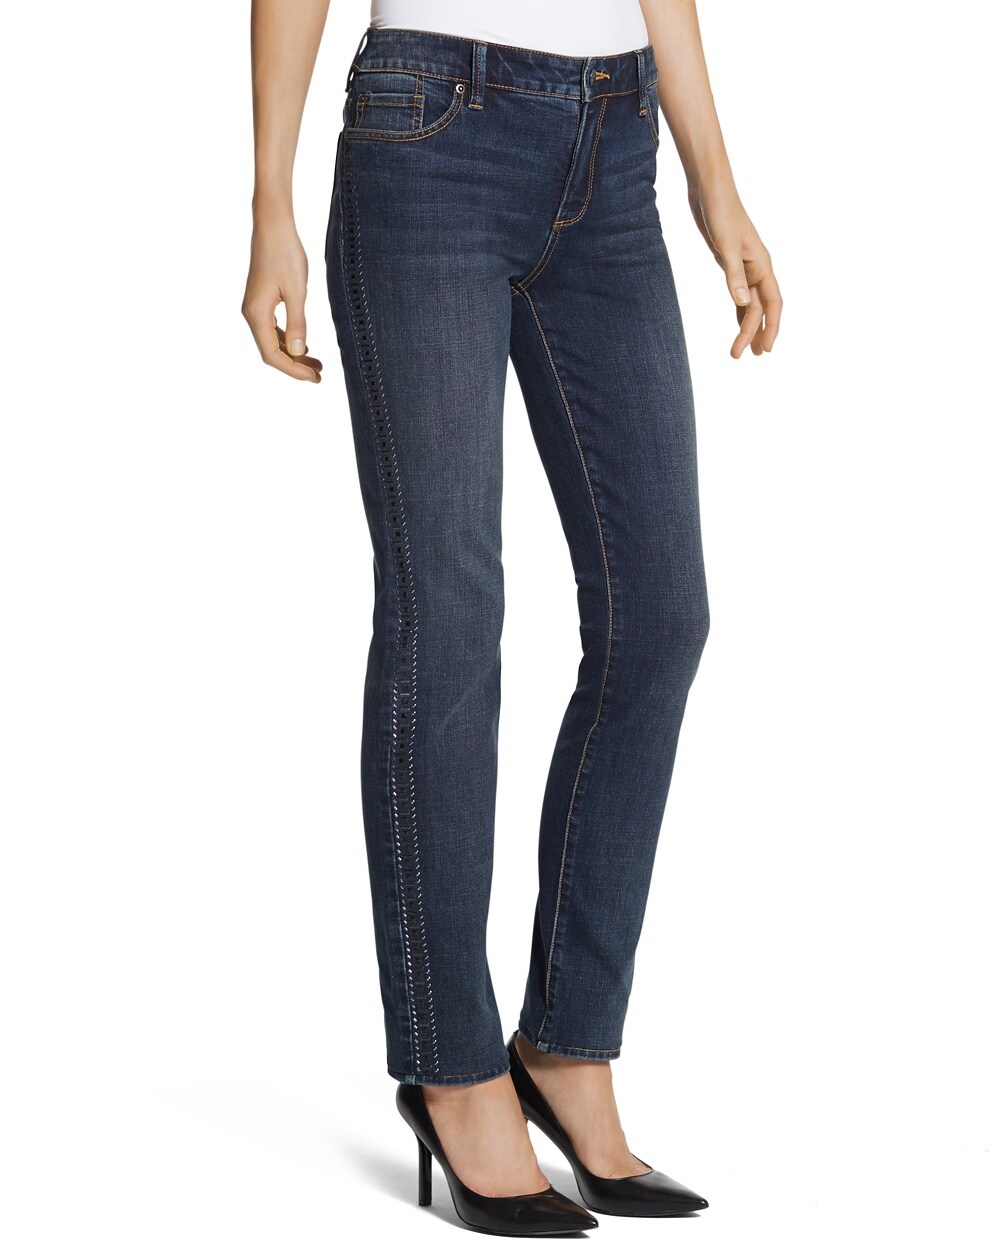 by Chico’s Side Embellished Jeans - Chico's